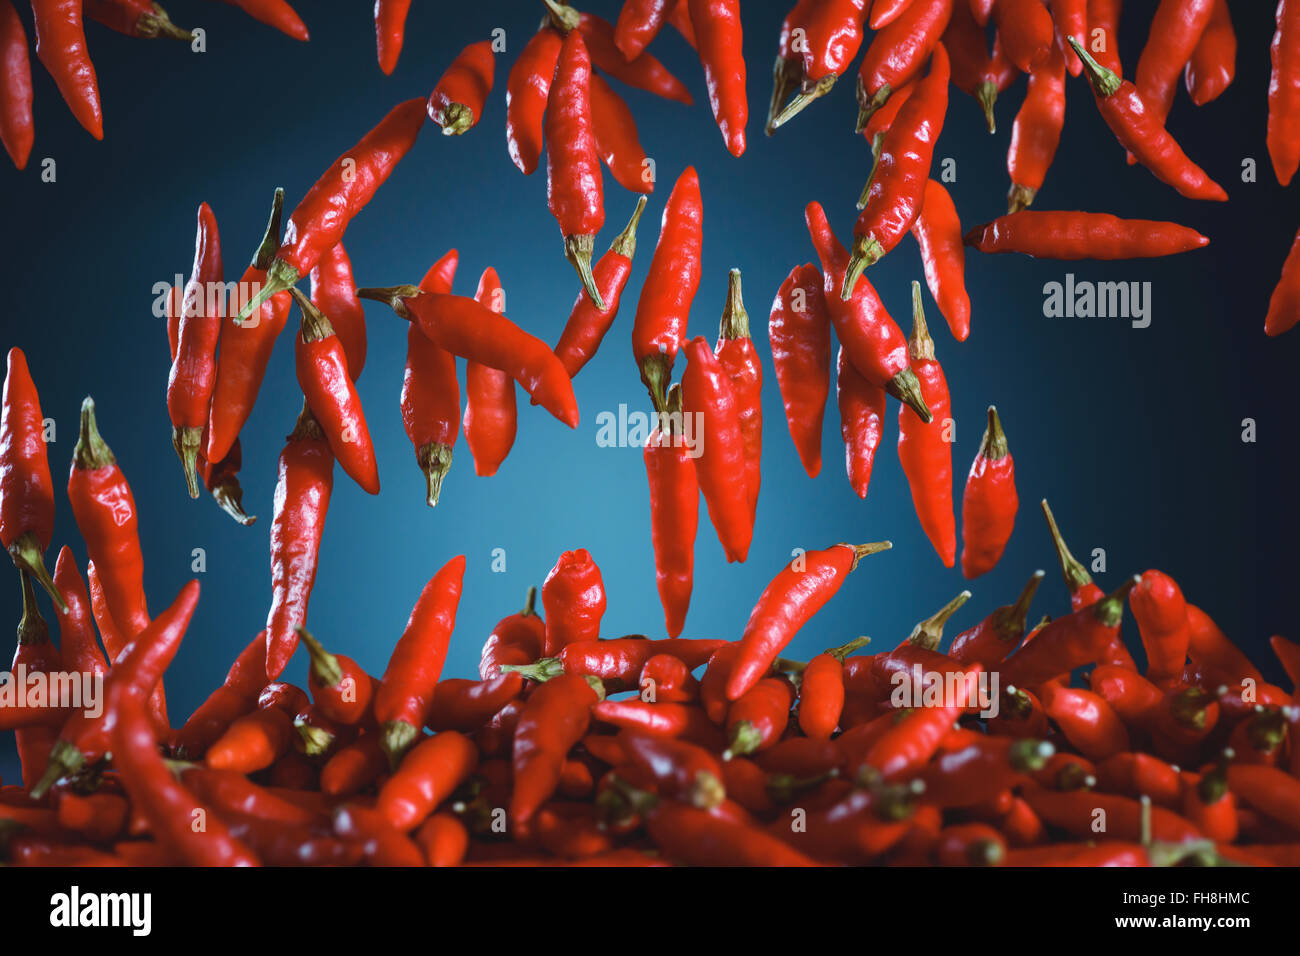 Red peppers falling. Image with depth of field and motion blur. Stock Photo